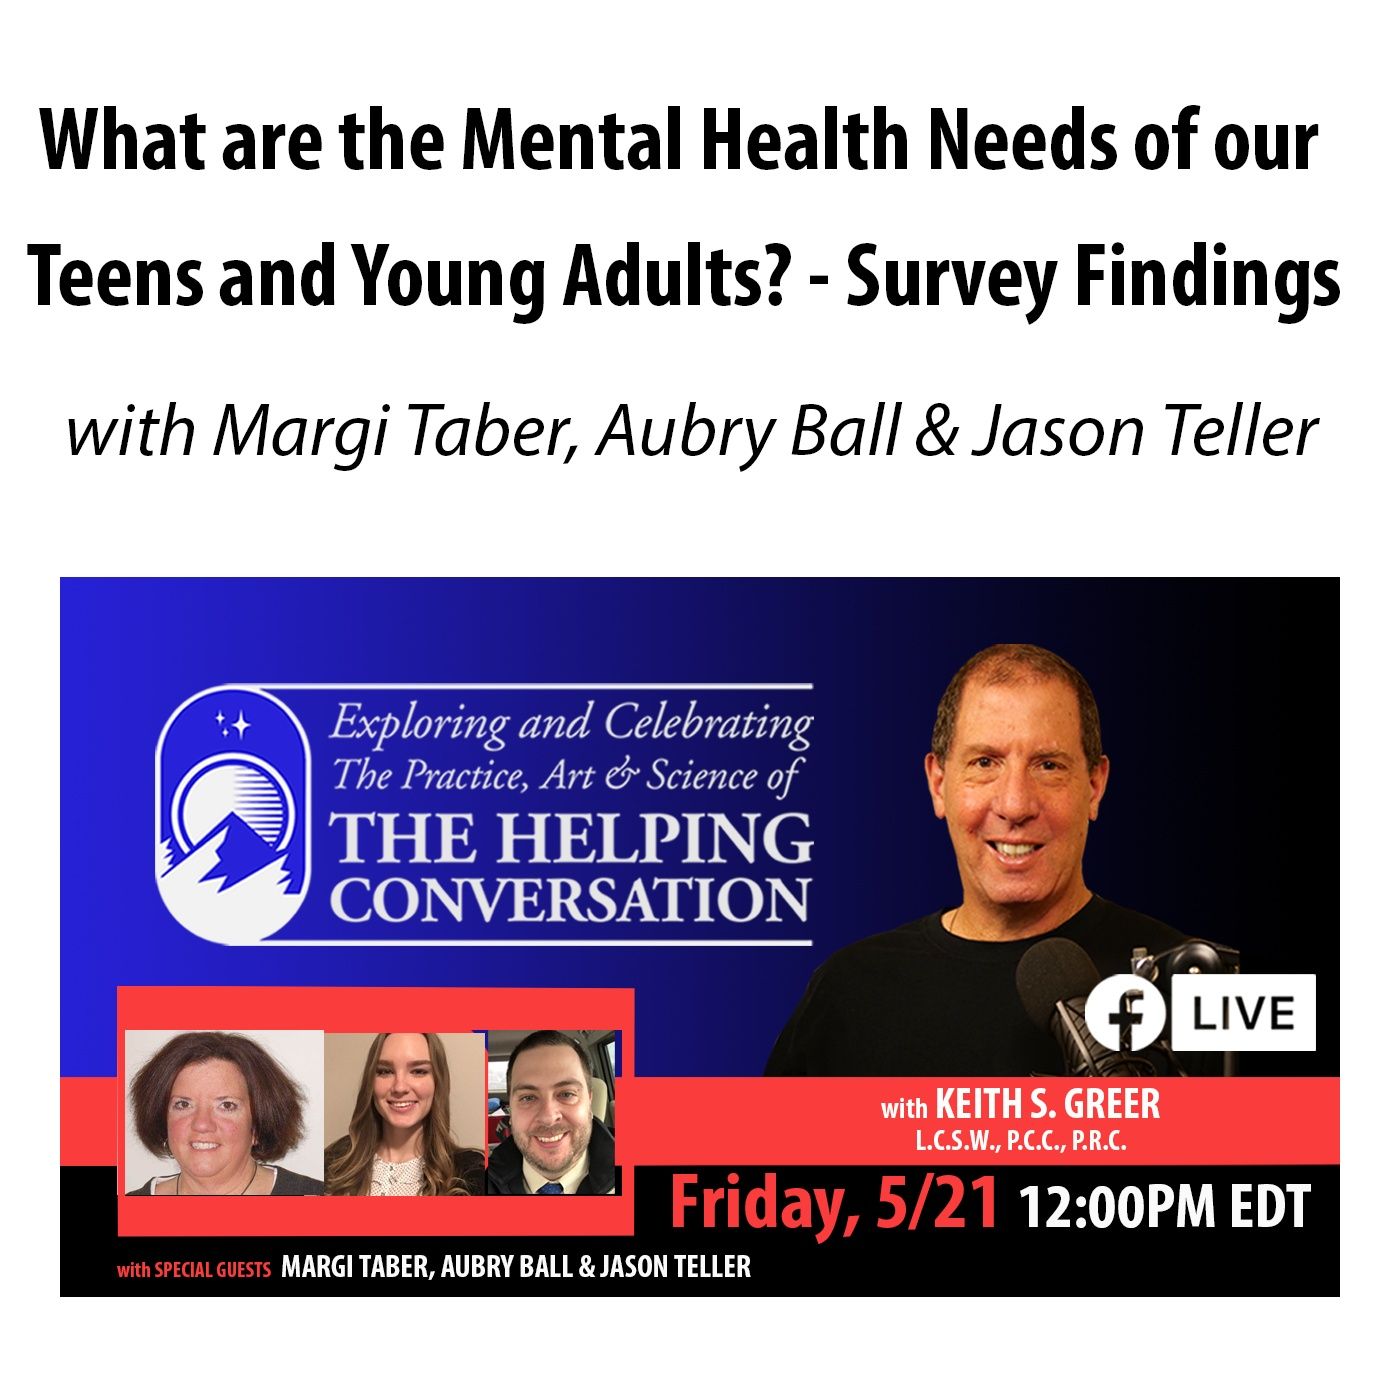 What are the Mental Health Needs of our Teens and Young Adults? - Survey Findings